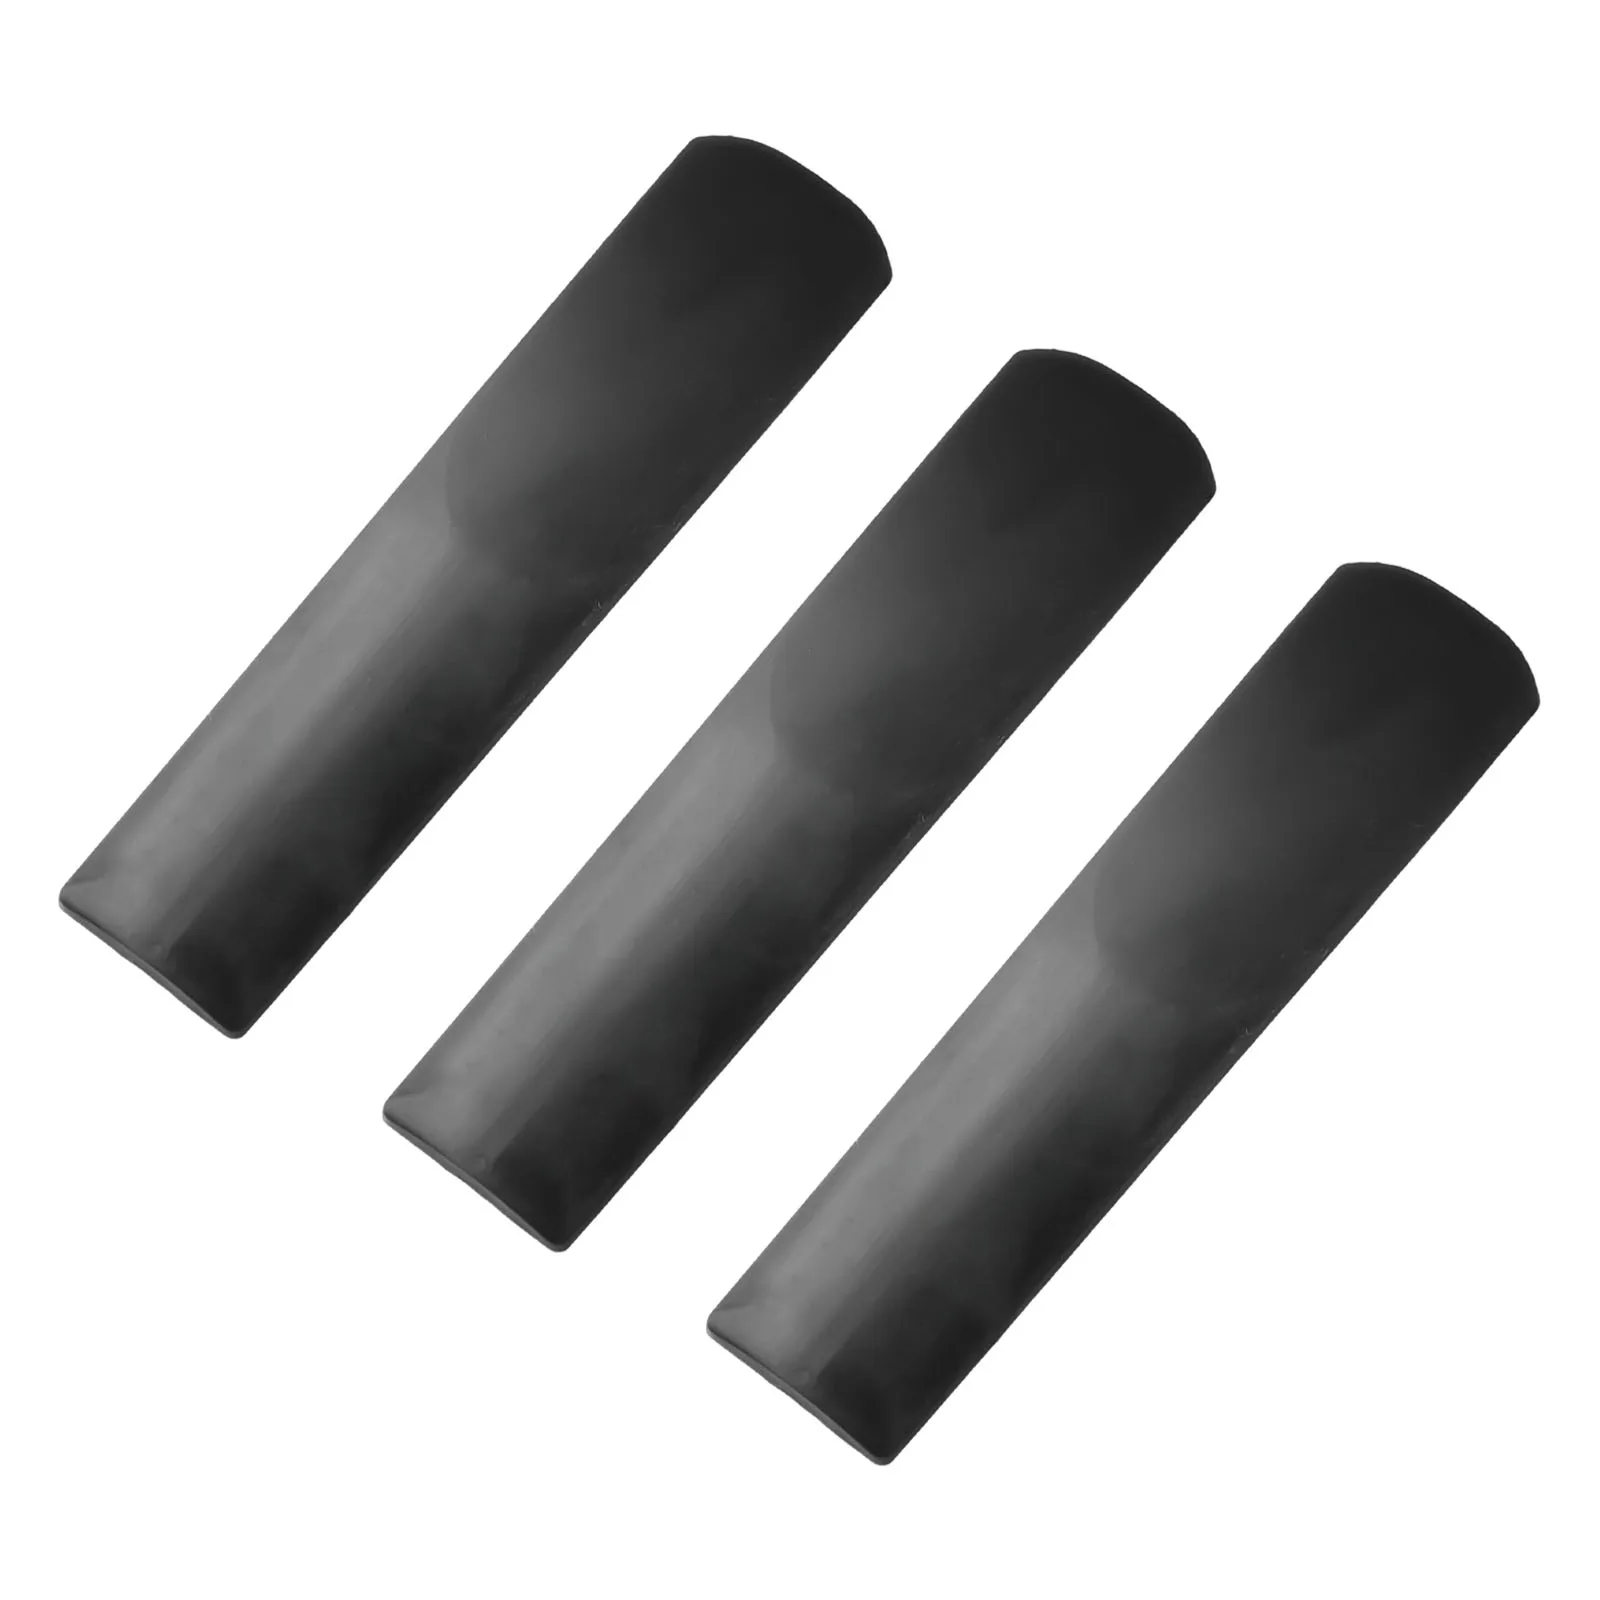 

3pcs Saxophone Reeds Resin Plastic Saxophone Reeds Parts For Clarinet Soprano Alto Tenor Sax Wind Accessories Musical Instrument